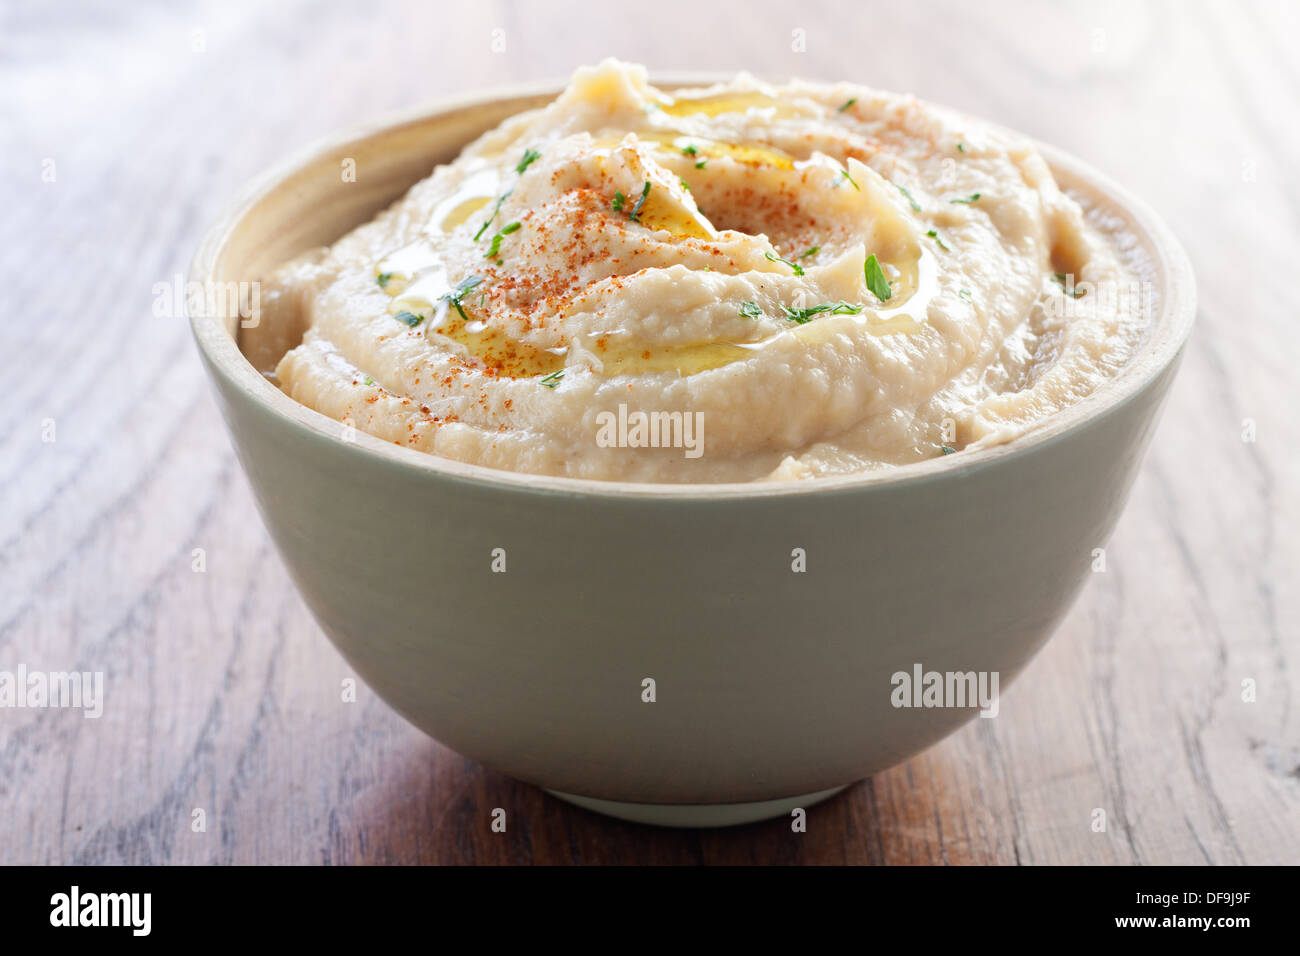 Delicious bowl of chickpea hummus with breadsticks Stock Photo